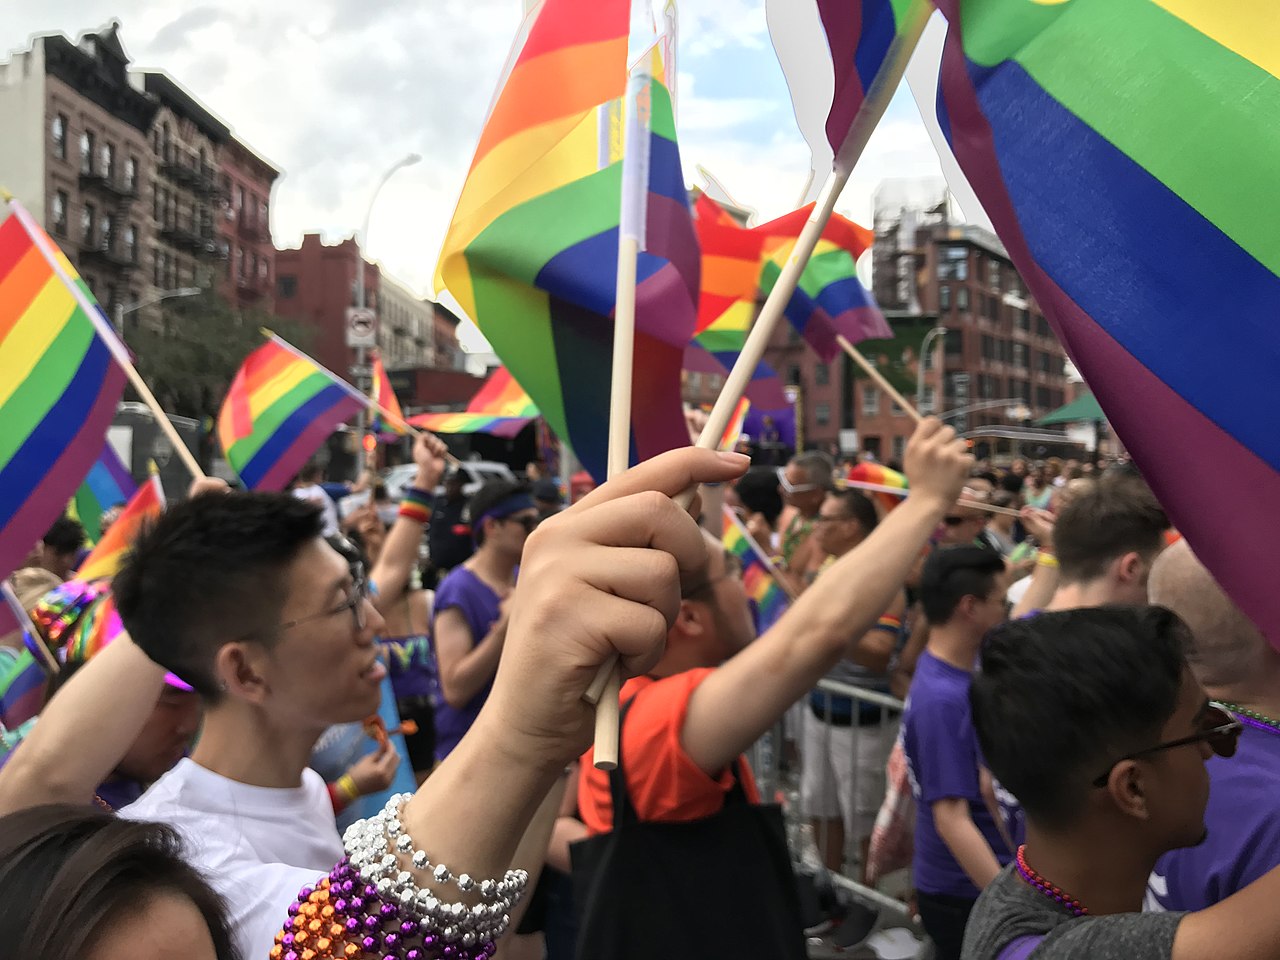 Brooklyn celebrates Pride Month with parade and festival - CBS New York